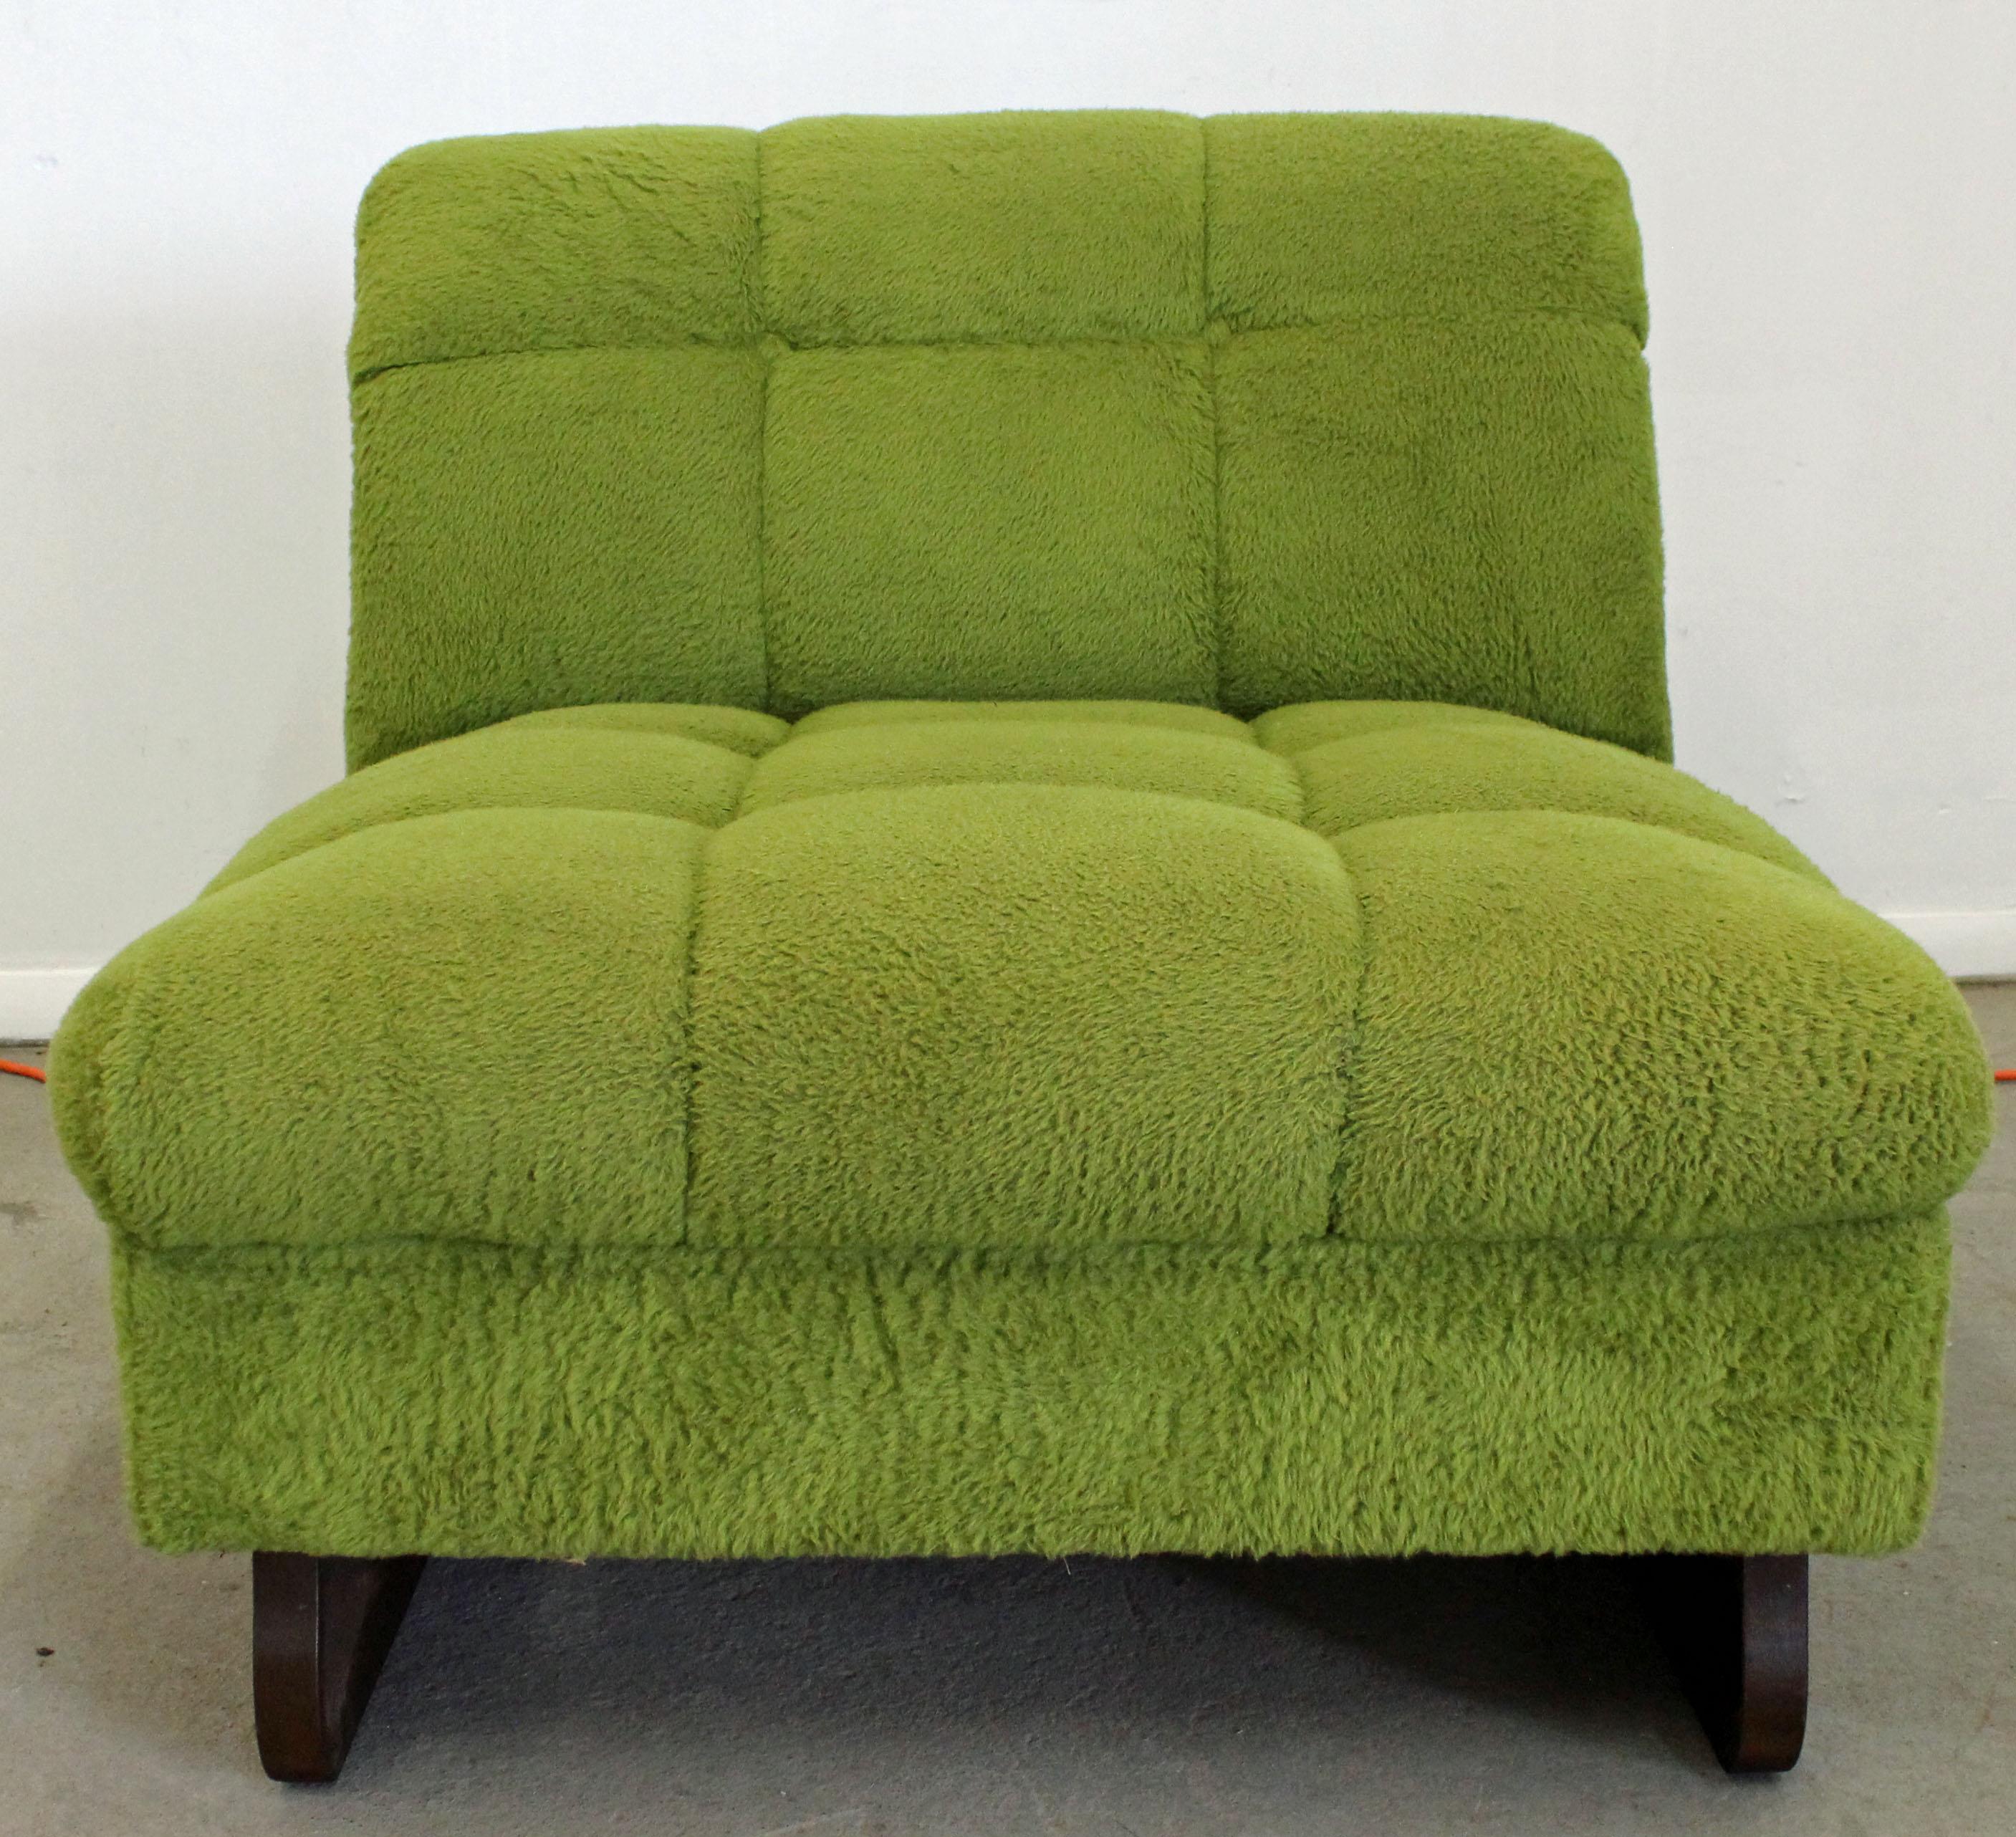 Offered is a Mid-Century Modern slipper chair in the style of Adrian Pearsall. The chair features green upholstery and sculpted walnut legs. It is in good condition, showing some age wear, needs to be reupholstered. The chair makes an excellent